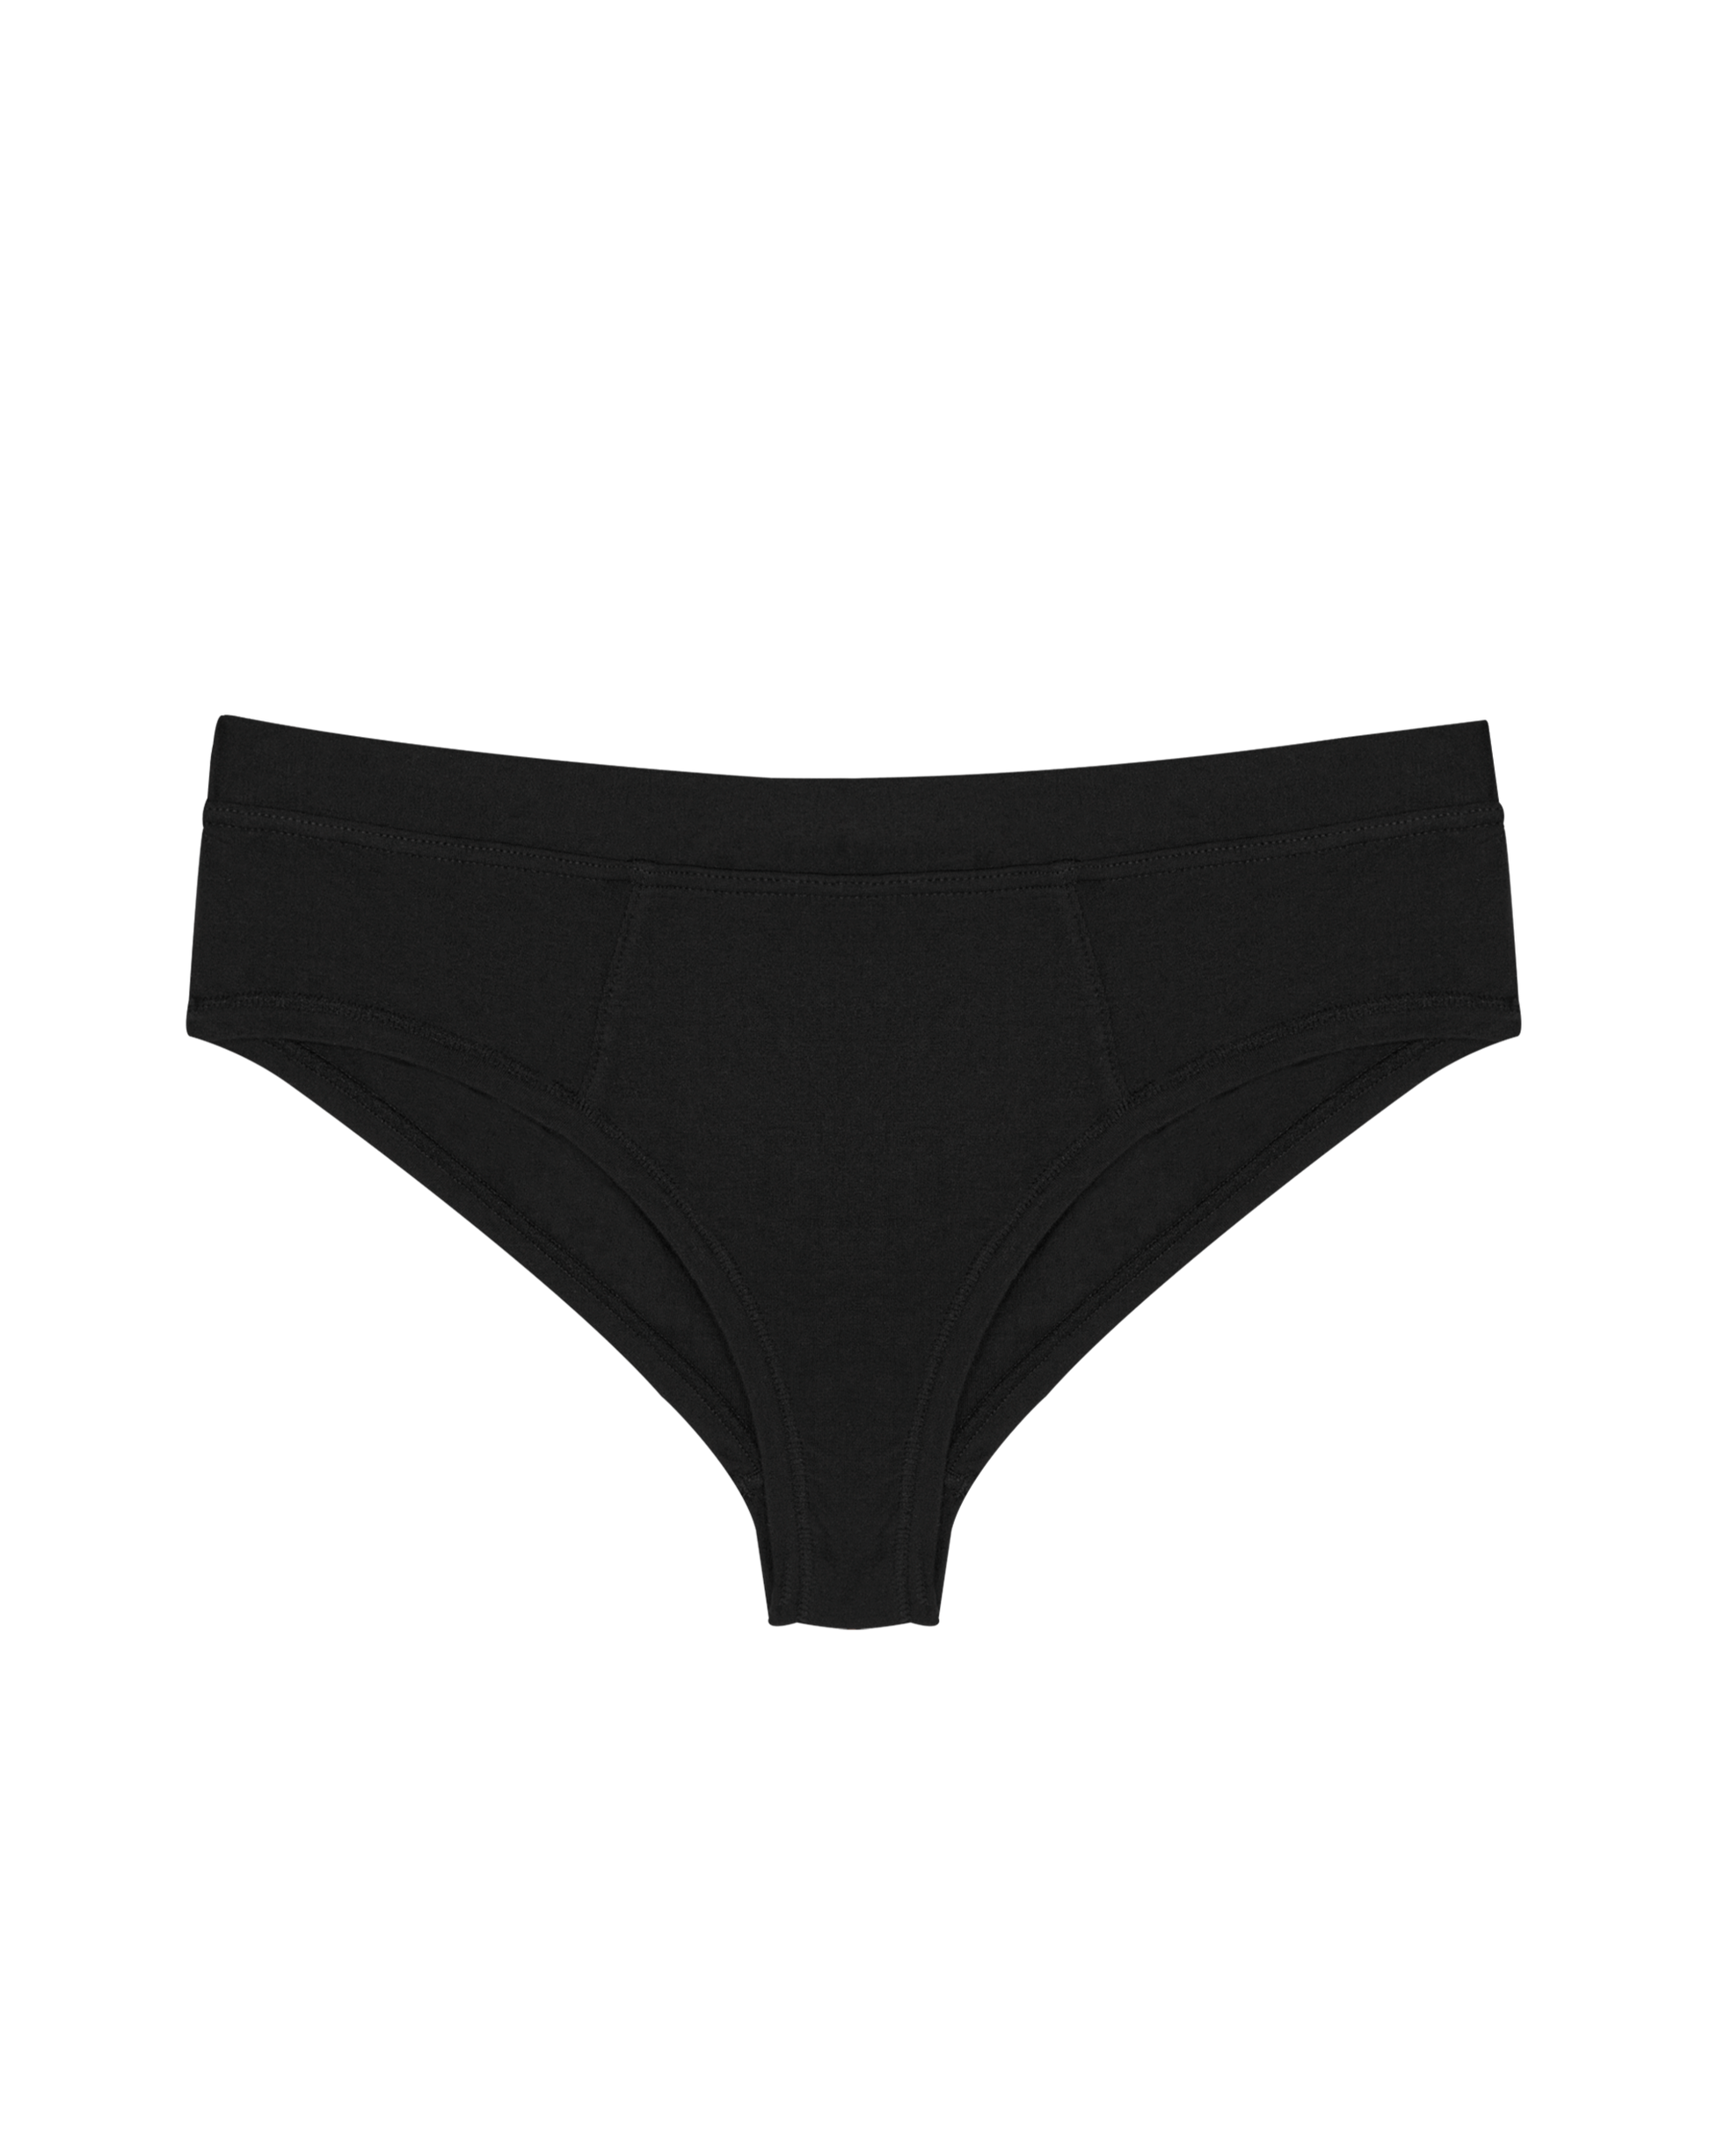 French cut Underwear – Online Shopping site in India